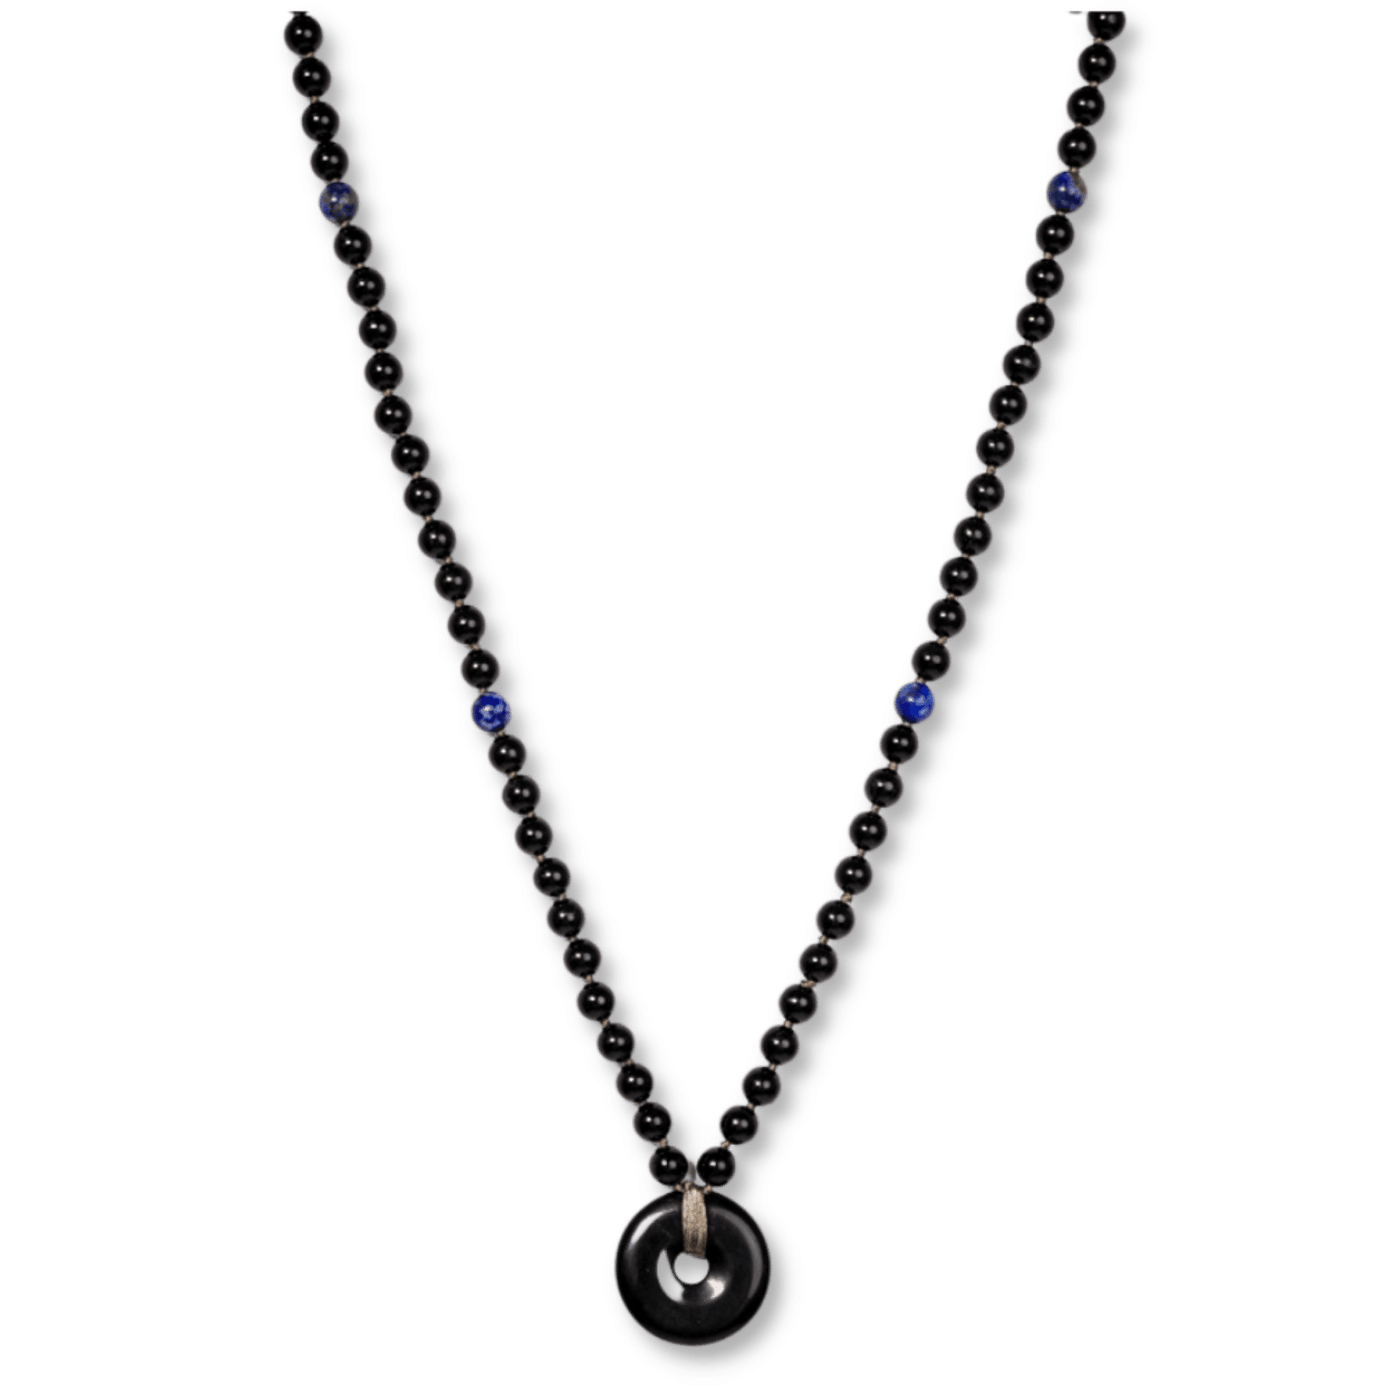 Protection Necklace